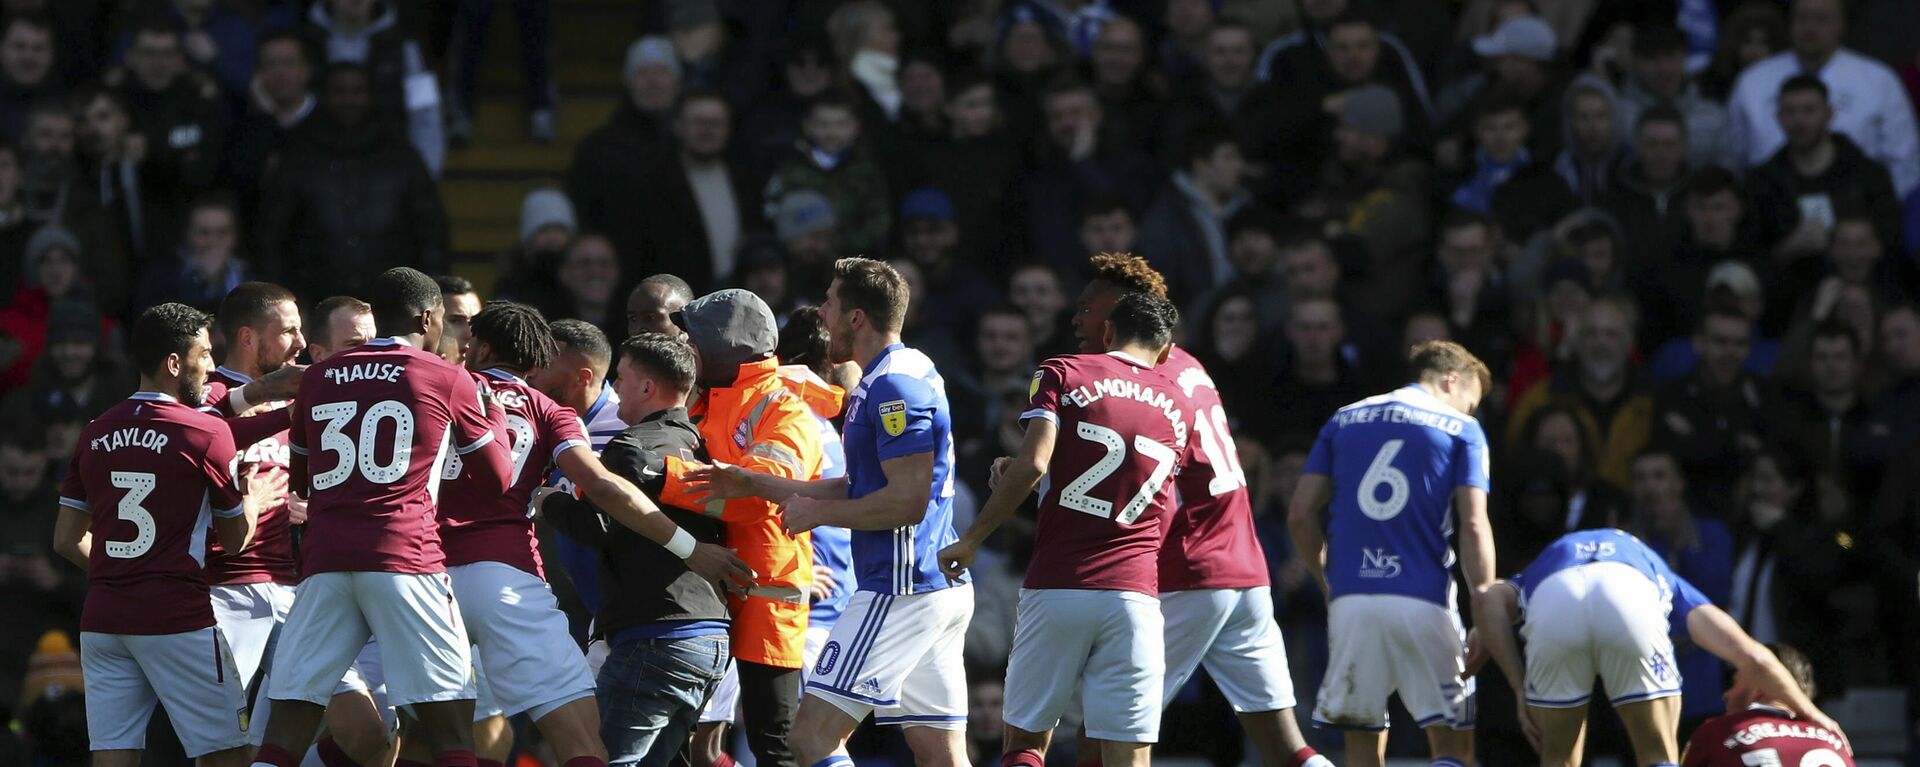 Aston Villa's Jack Grealish sits, nursing a sore head, after being punched by a Birmingham City fan at a game on 10 March 2019 - اسپوتنیک افغانستان  , 1920, 30.06.2021